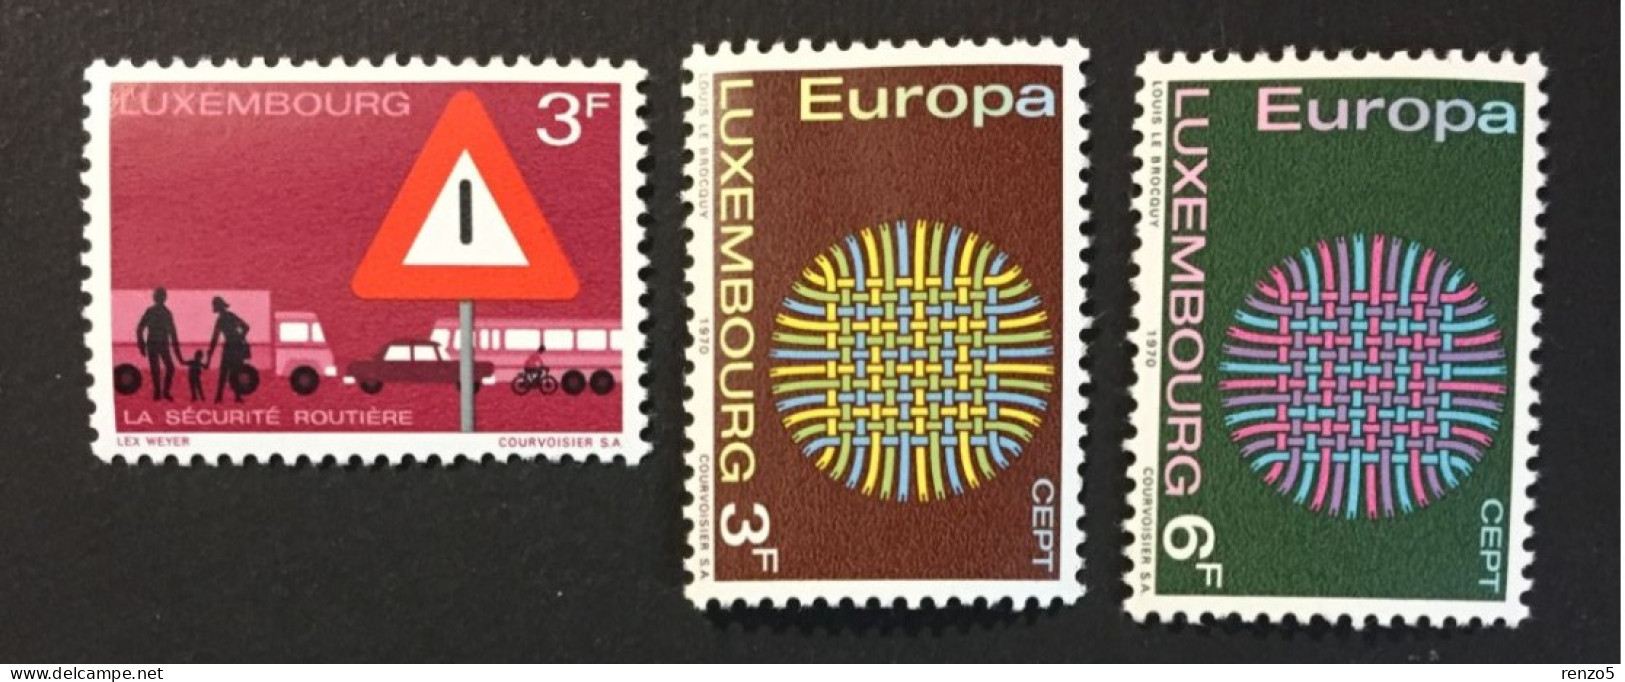 1970 Luxembourg -The Importance Of Traffic Safety, Europa CEPT - Unused - Unused Stamps